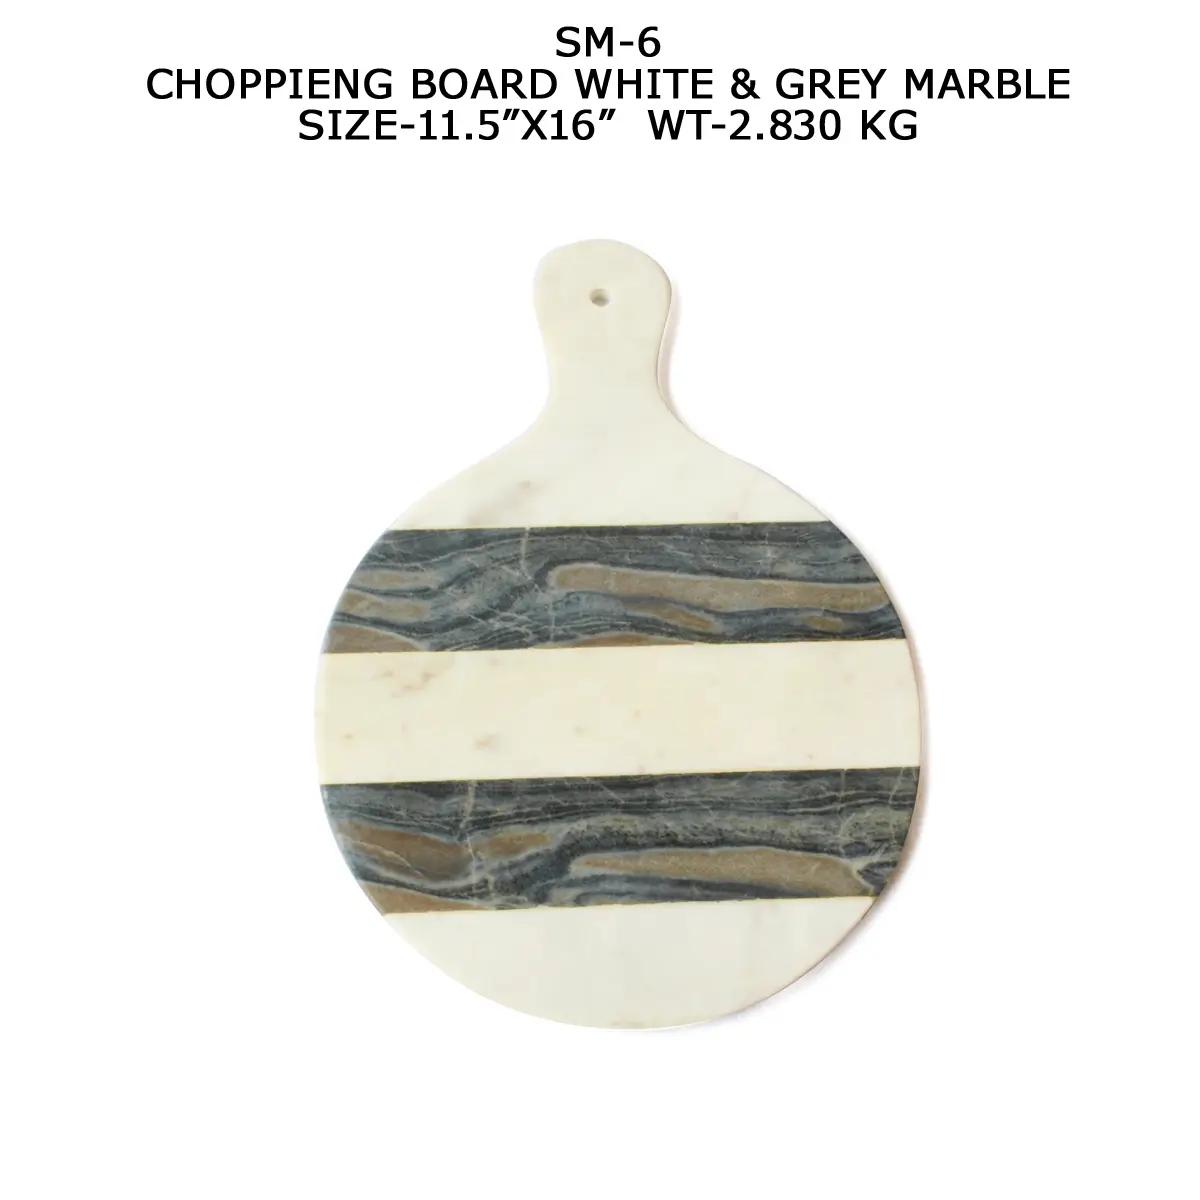 CHOPPING BOARD WITH HANDLE WHITE AND GREY
MARBLE